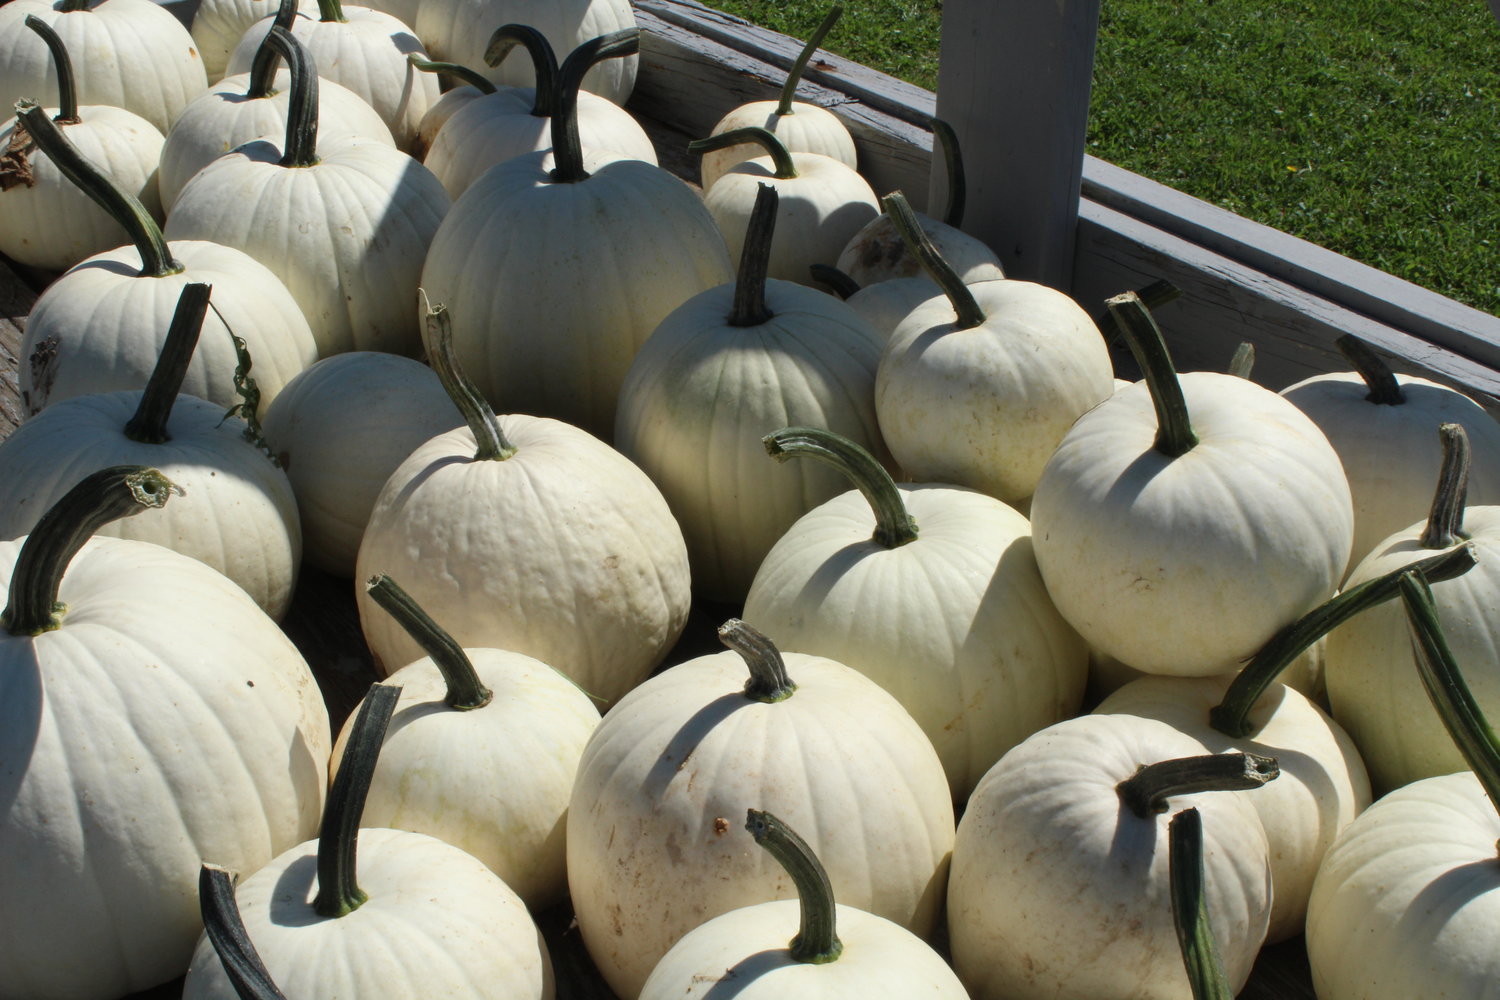 The white pumpkin is one of 20 varieties planted each year by the farm.